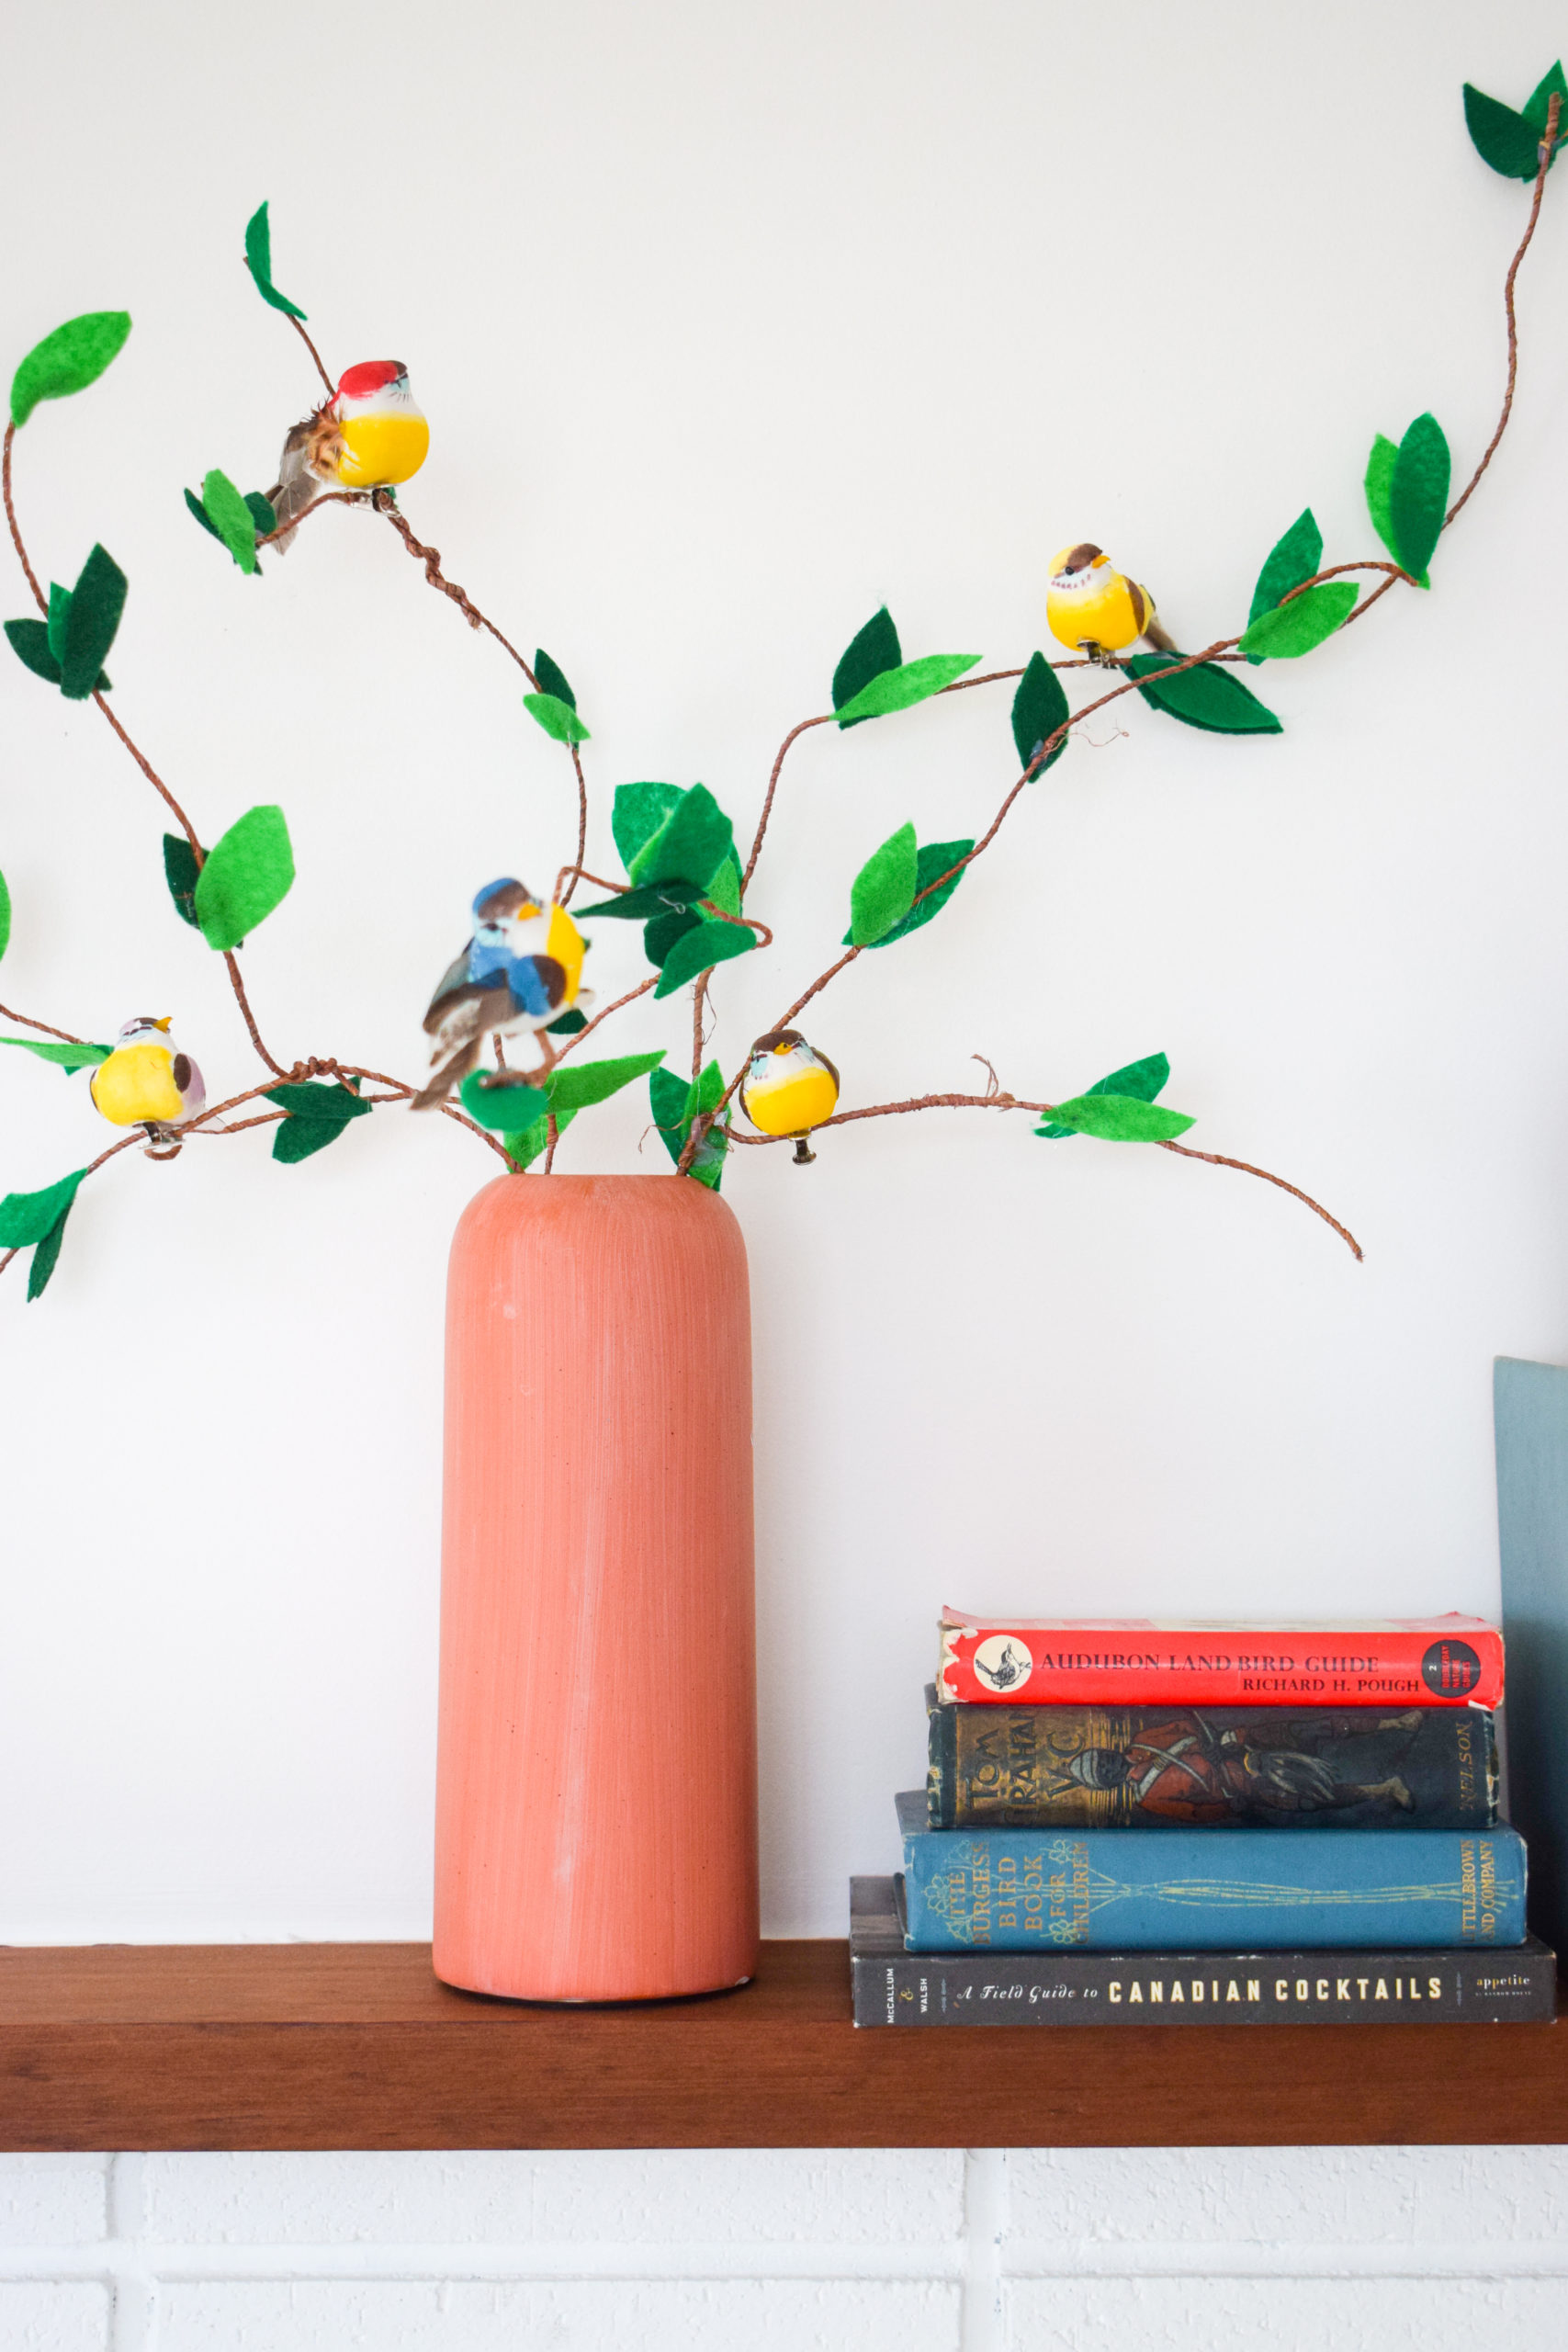 Create a toddler friendly spring arrangement using crafting wire, felt, and some little birds. Don't forget the perfect crafting scissors too!